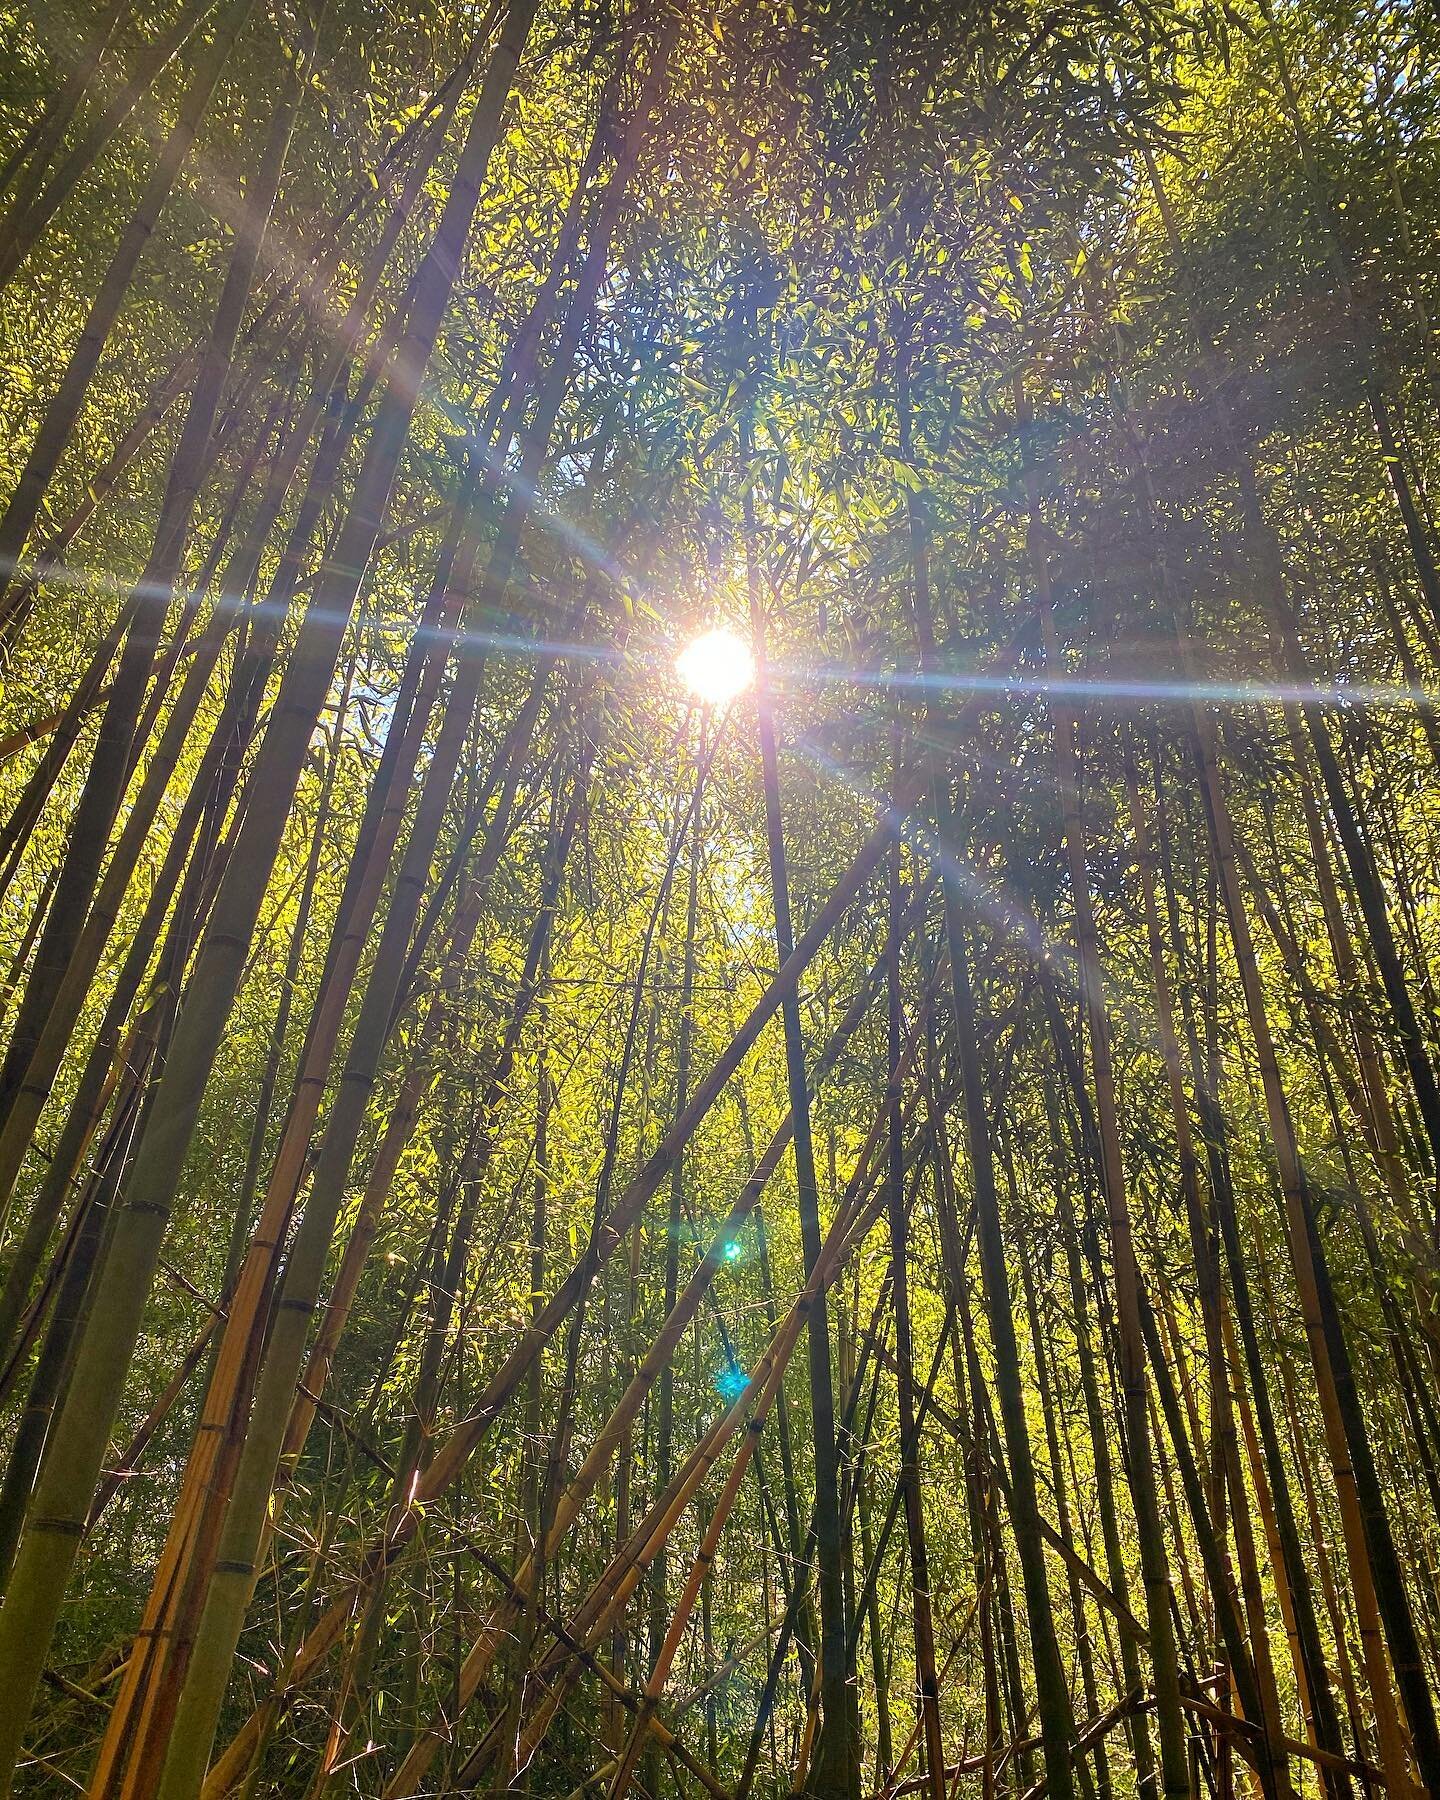 Bamboo forest #aov #chasinglight #mood #simplelife #om #liveauthentic #pursuepretty #lightandshadow #intheforest #avltoday #avlife #avl #wncphotographer